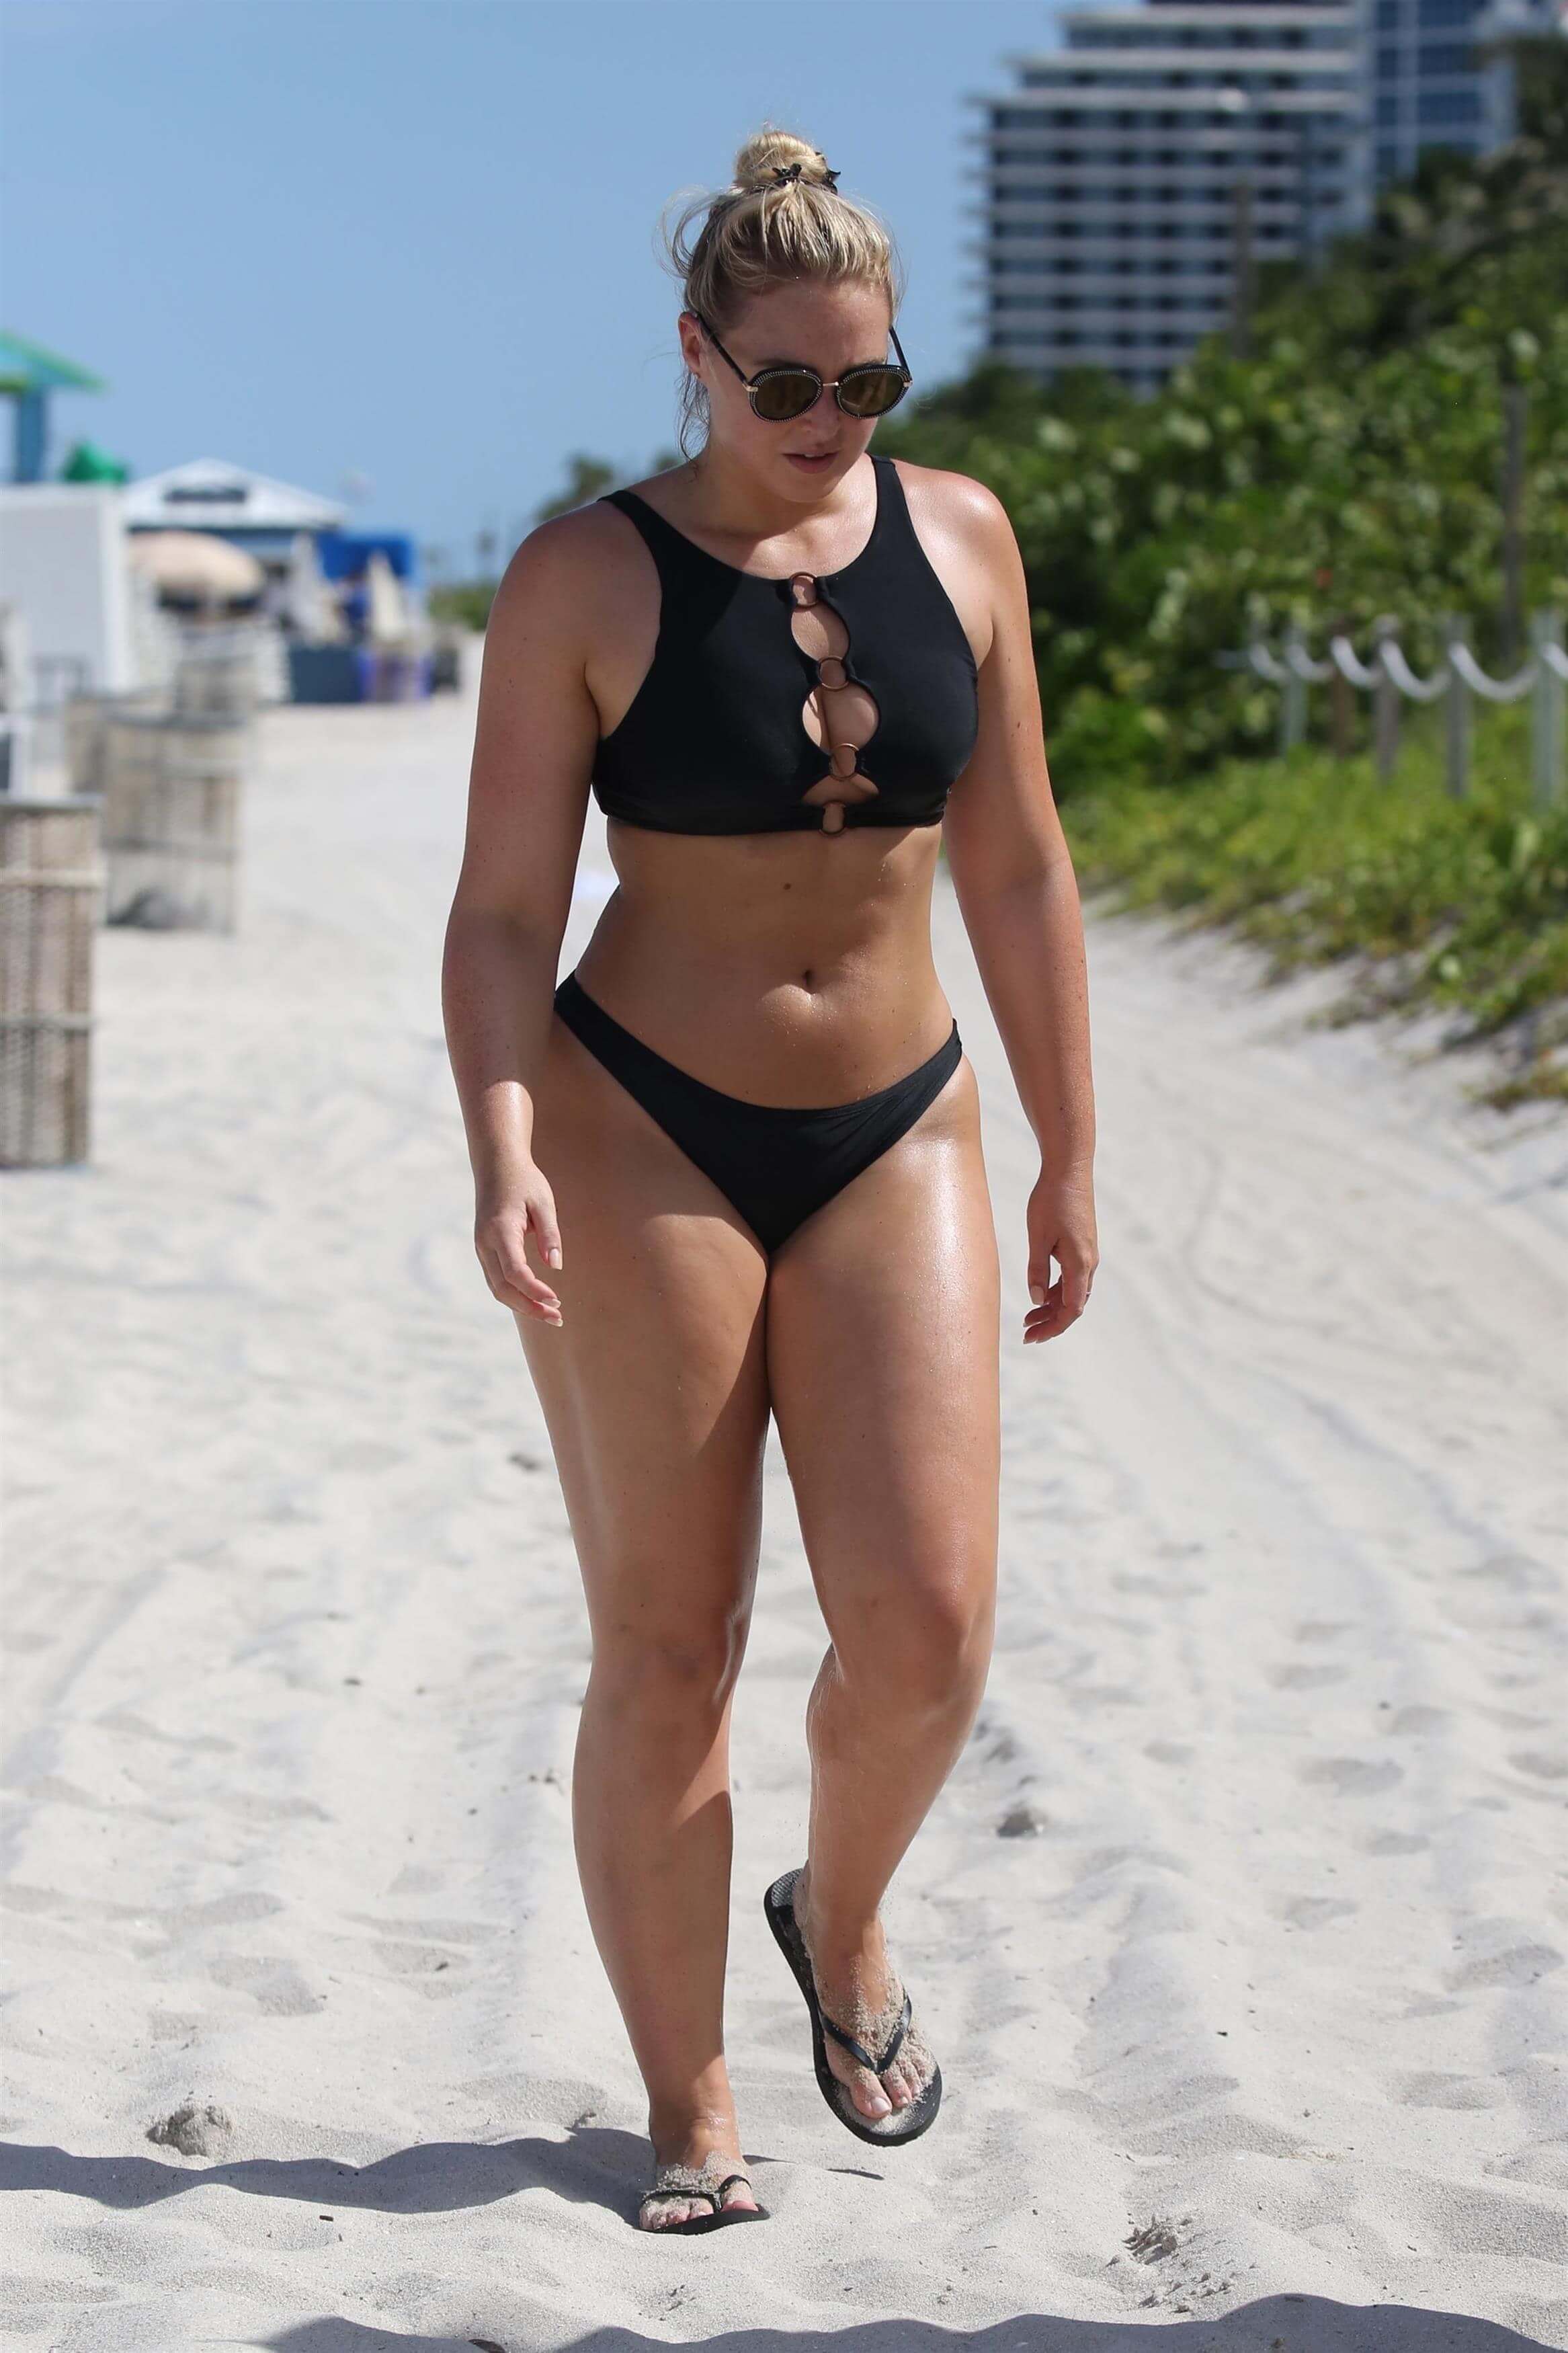 The Hottest Photos Of Iskra Lawrence.